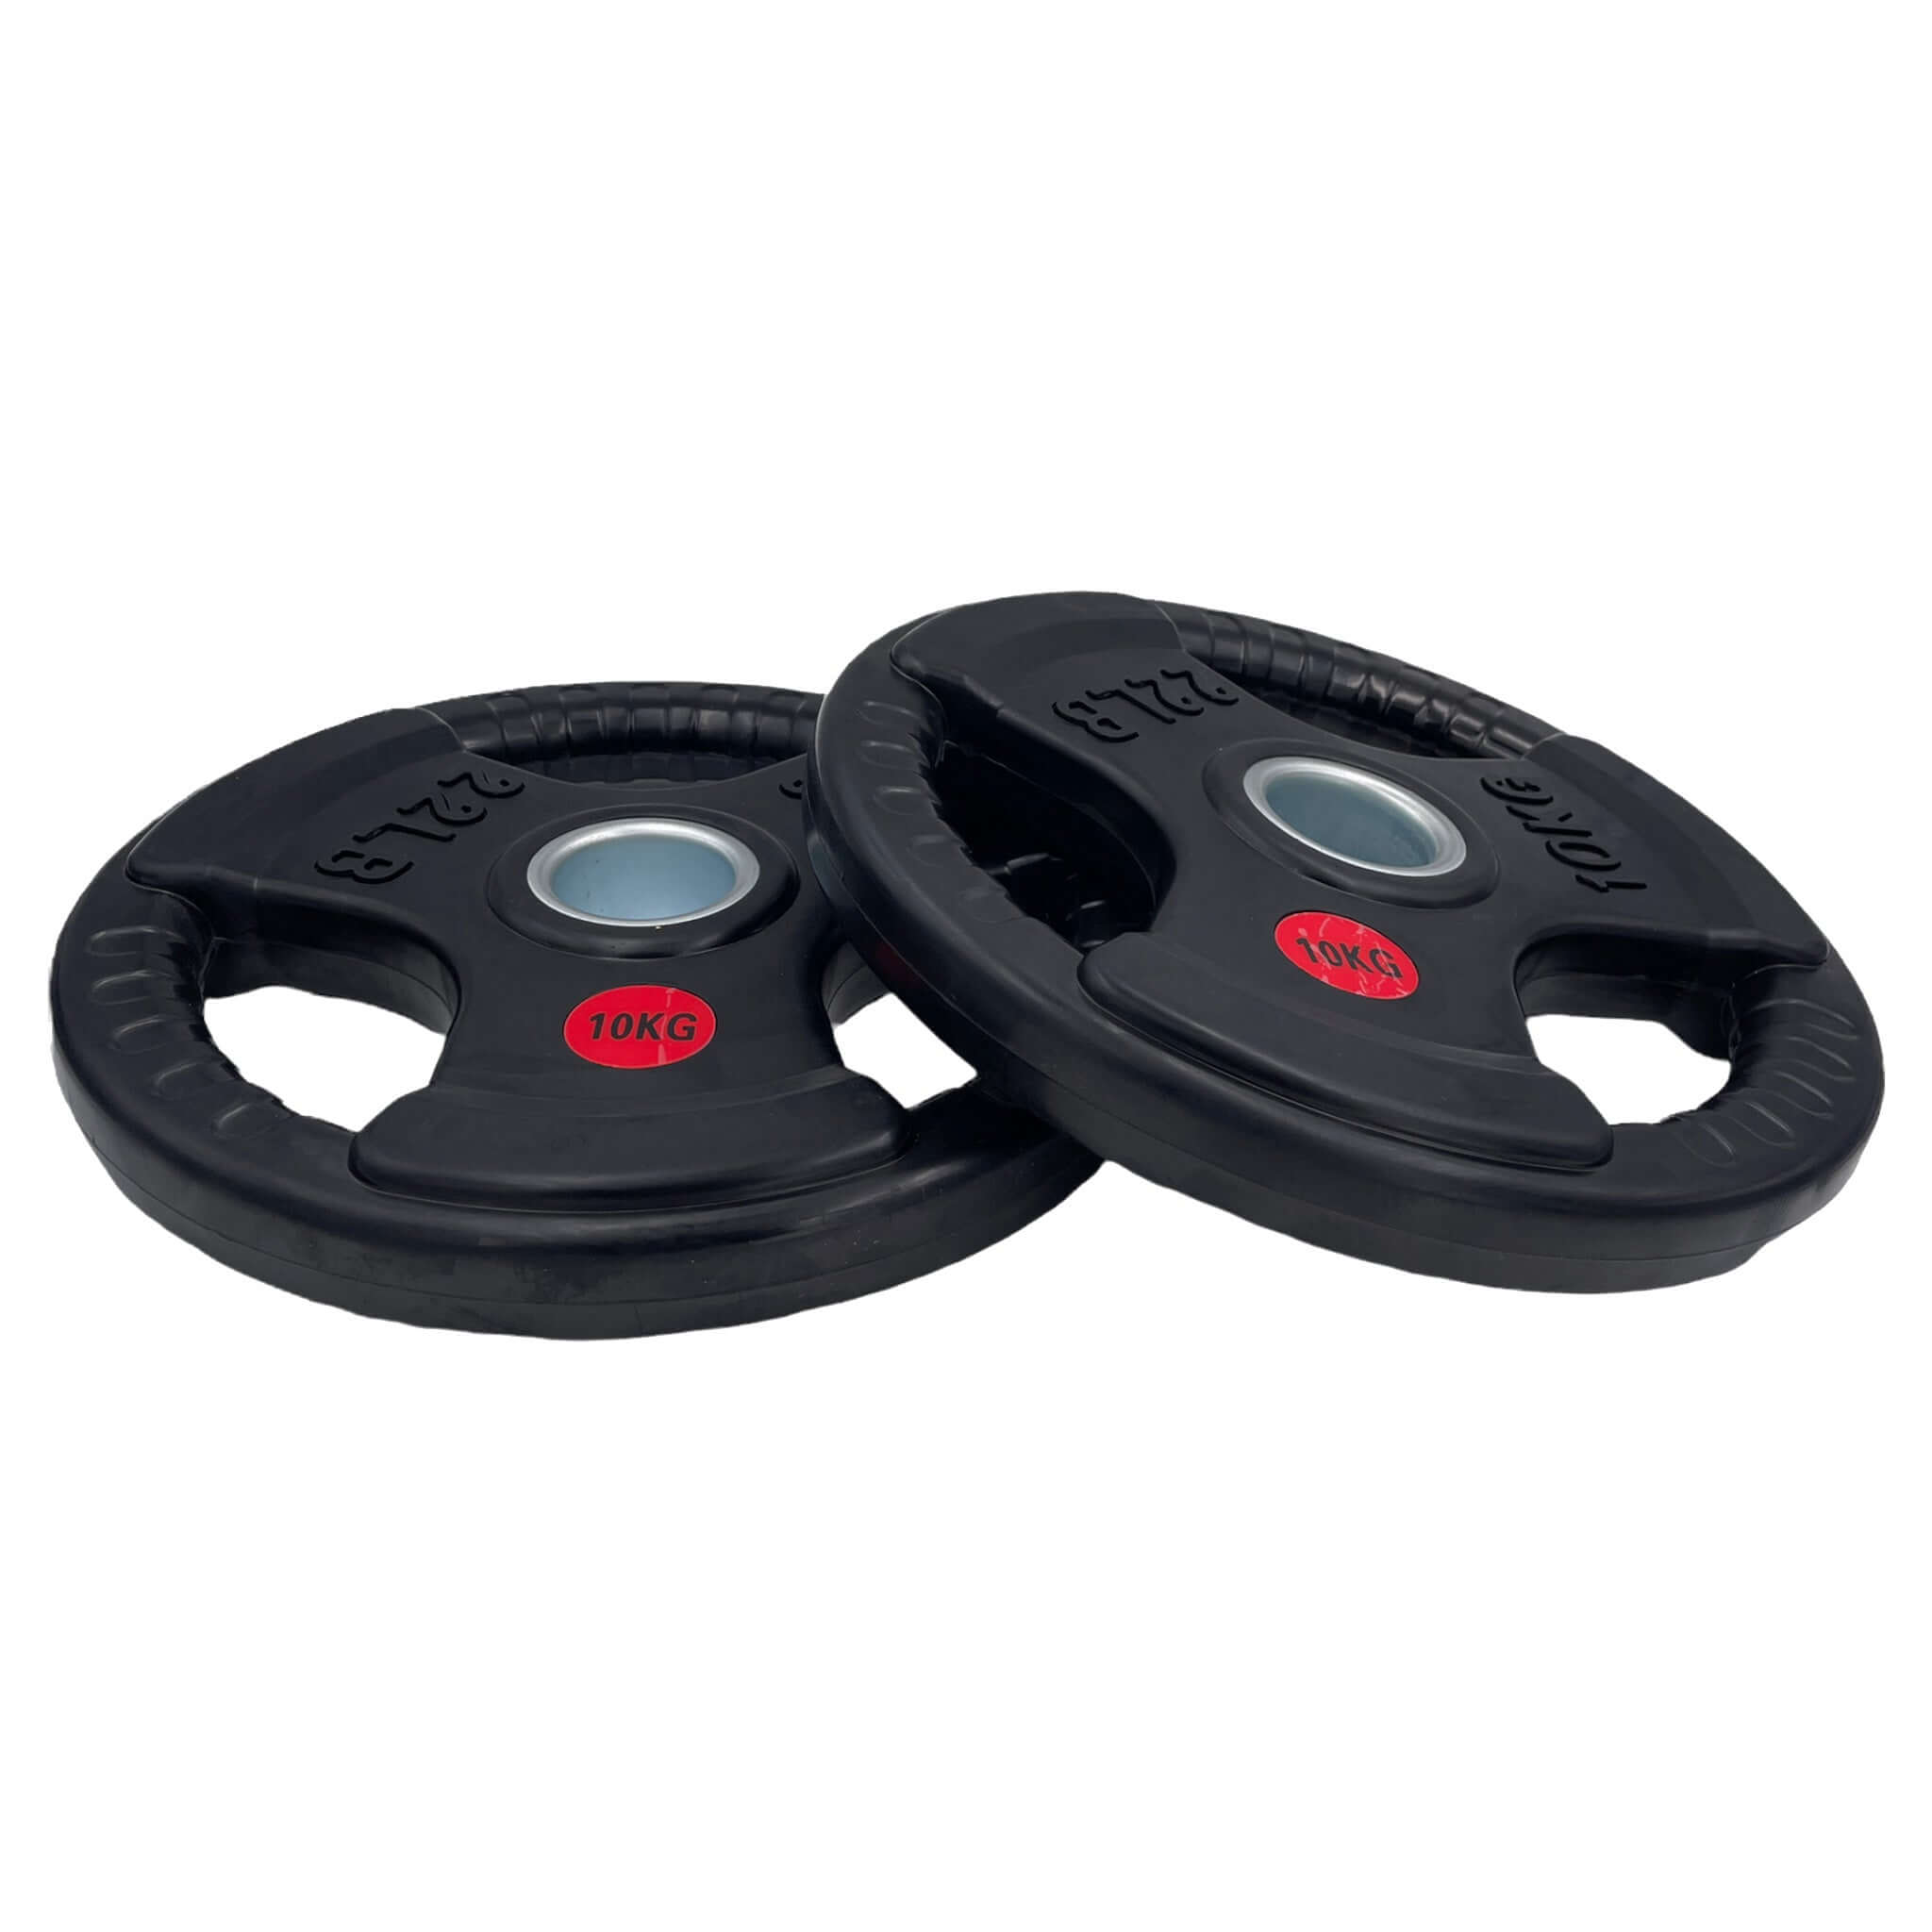 10kg Rubber Tri-grip Weight Plates Type-O Pair | INSOURCE